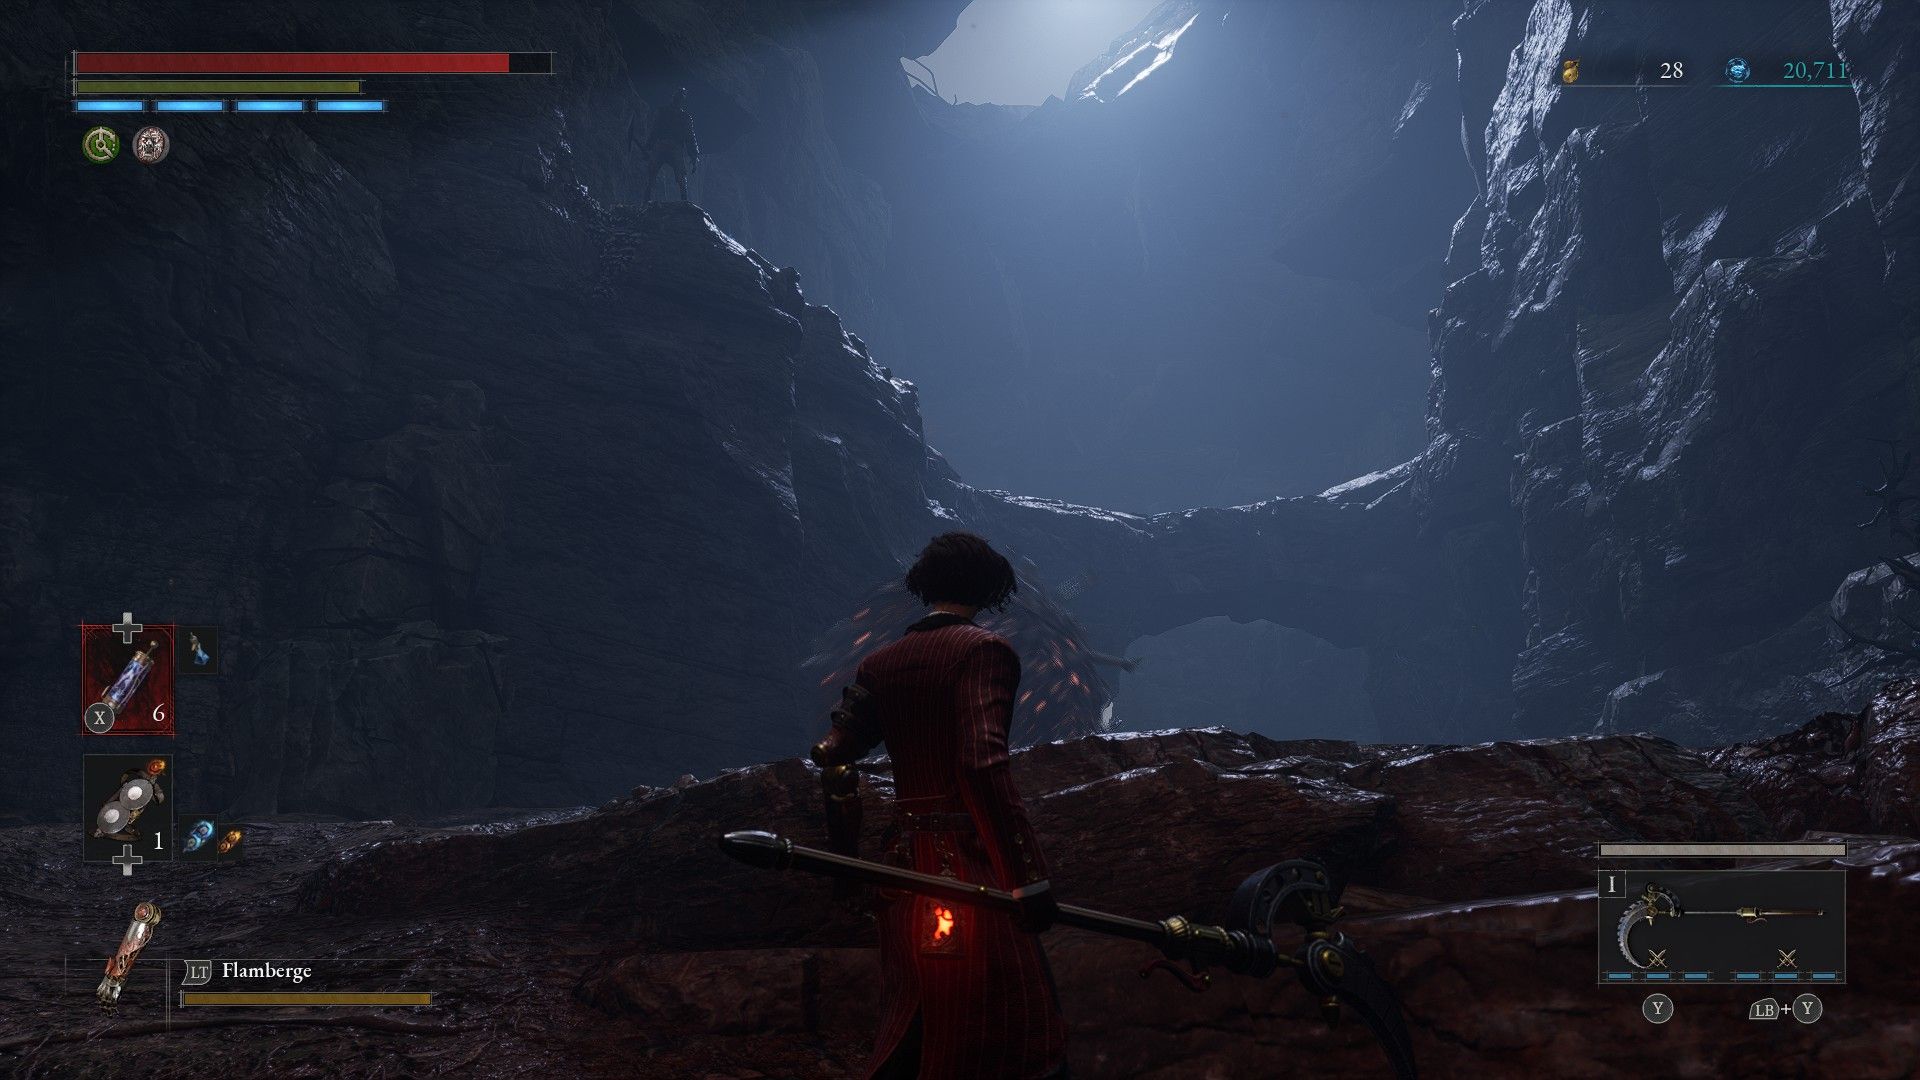 P faces rolling ball in ravine cave and spies carcass on the ledge above in Lies of P